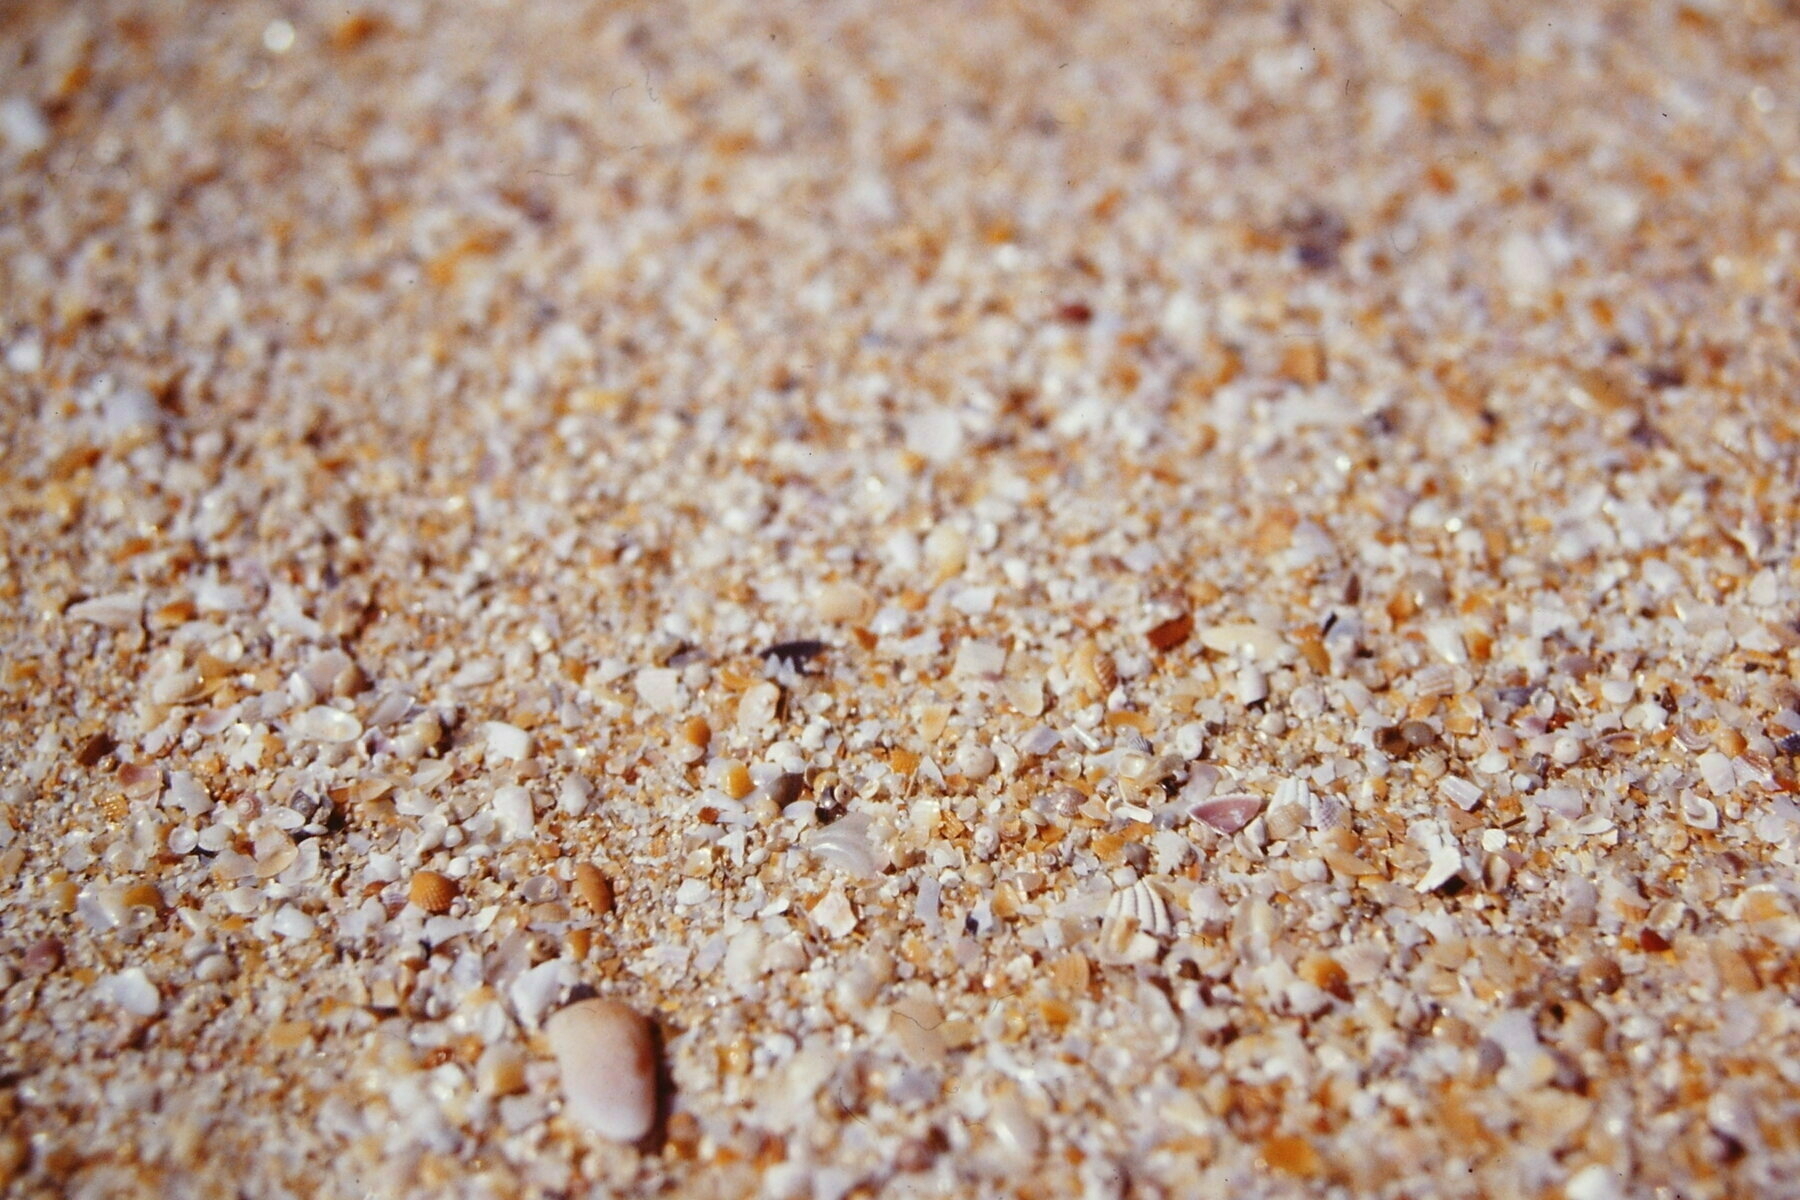 A close up of a beach seeing the small grains of sand, small shells and tiny stones